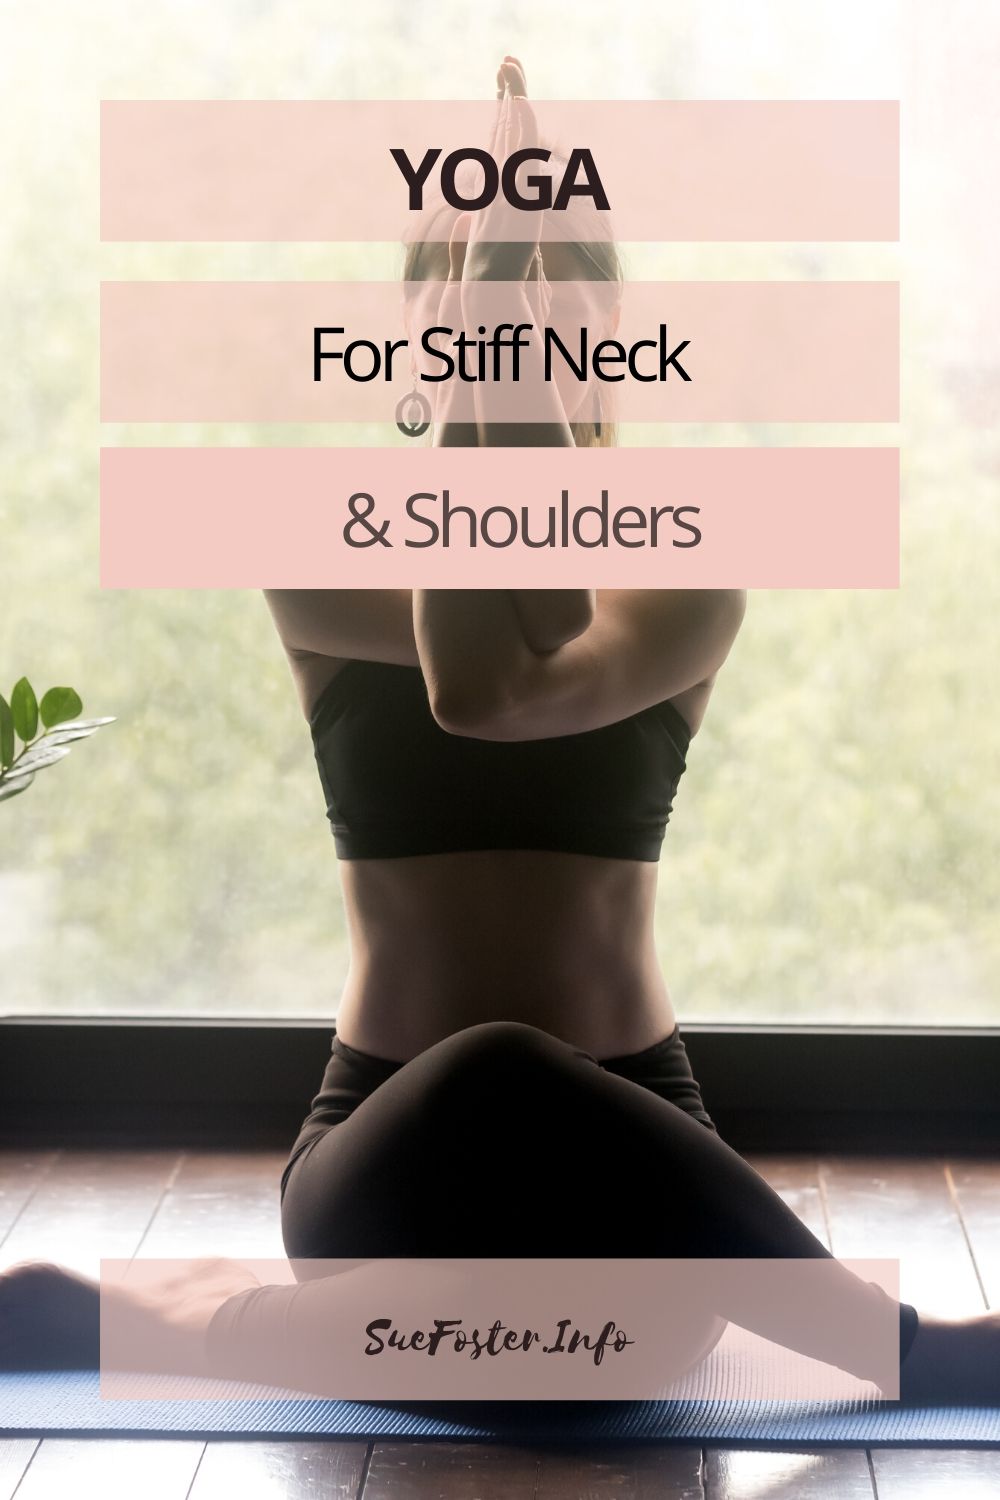 Yoga poses to help ease stiff neck and shoulders.